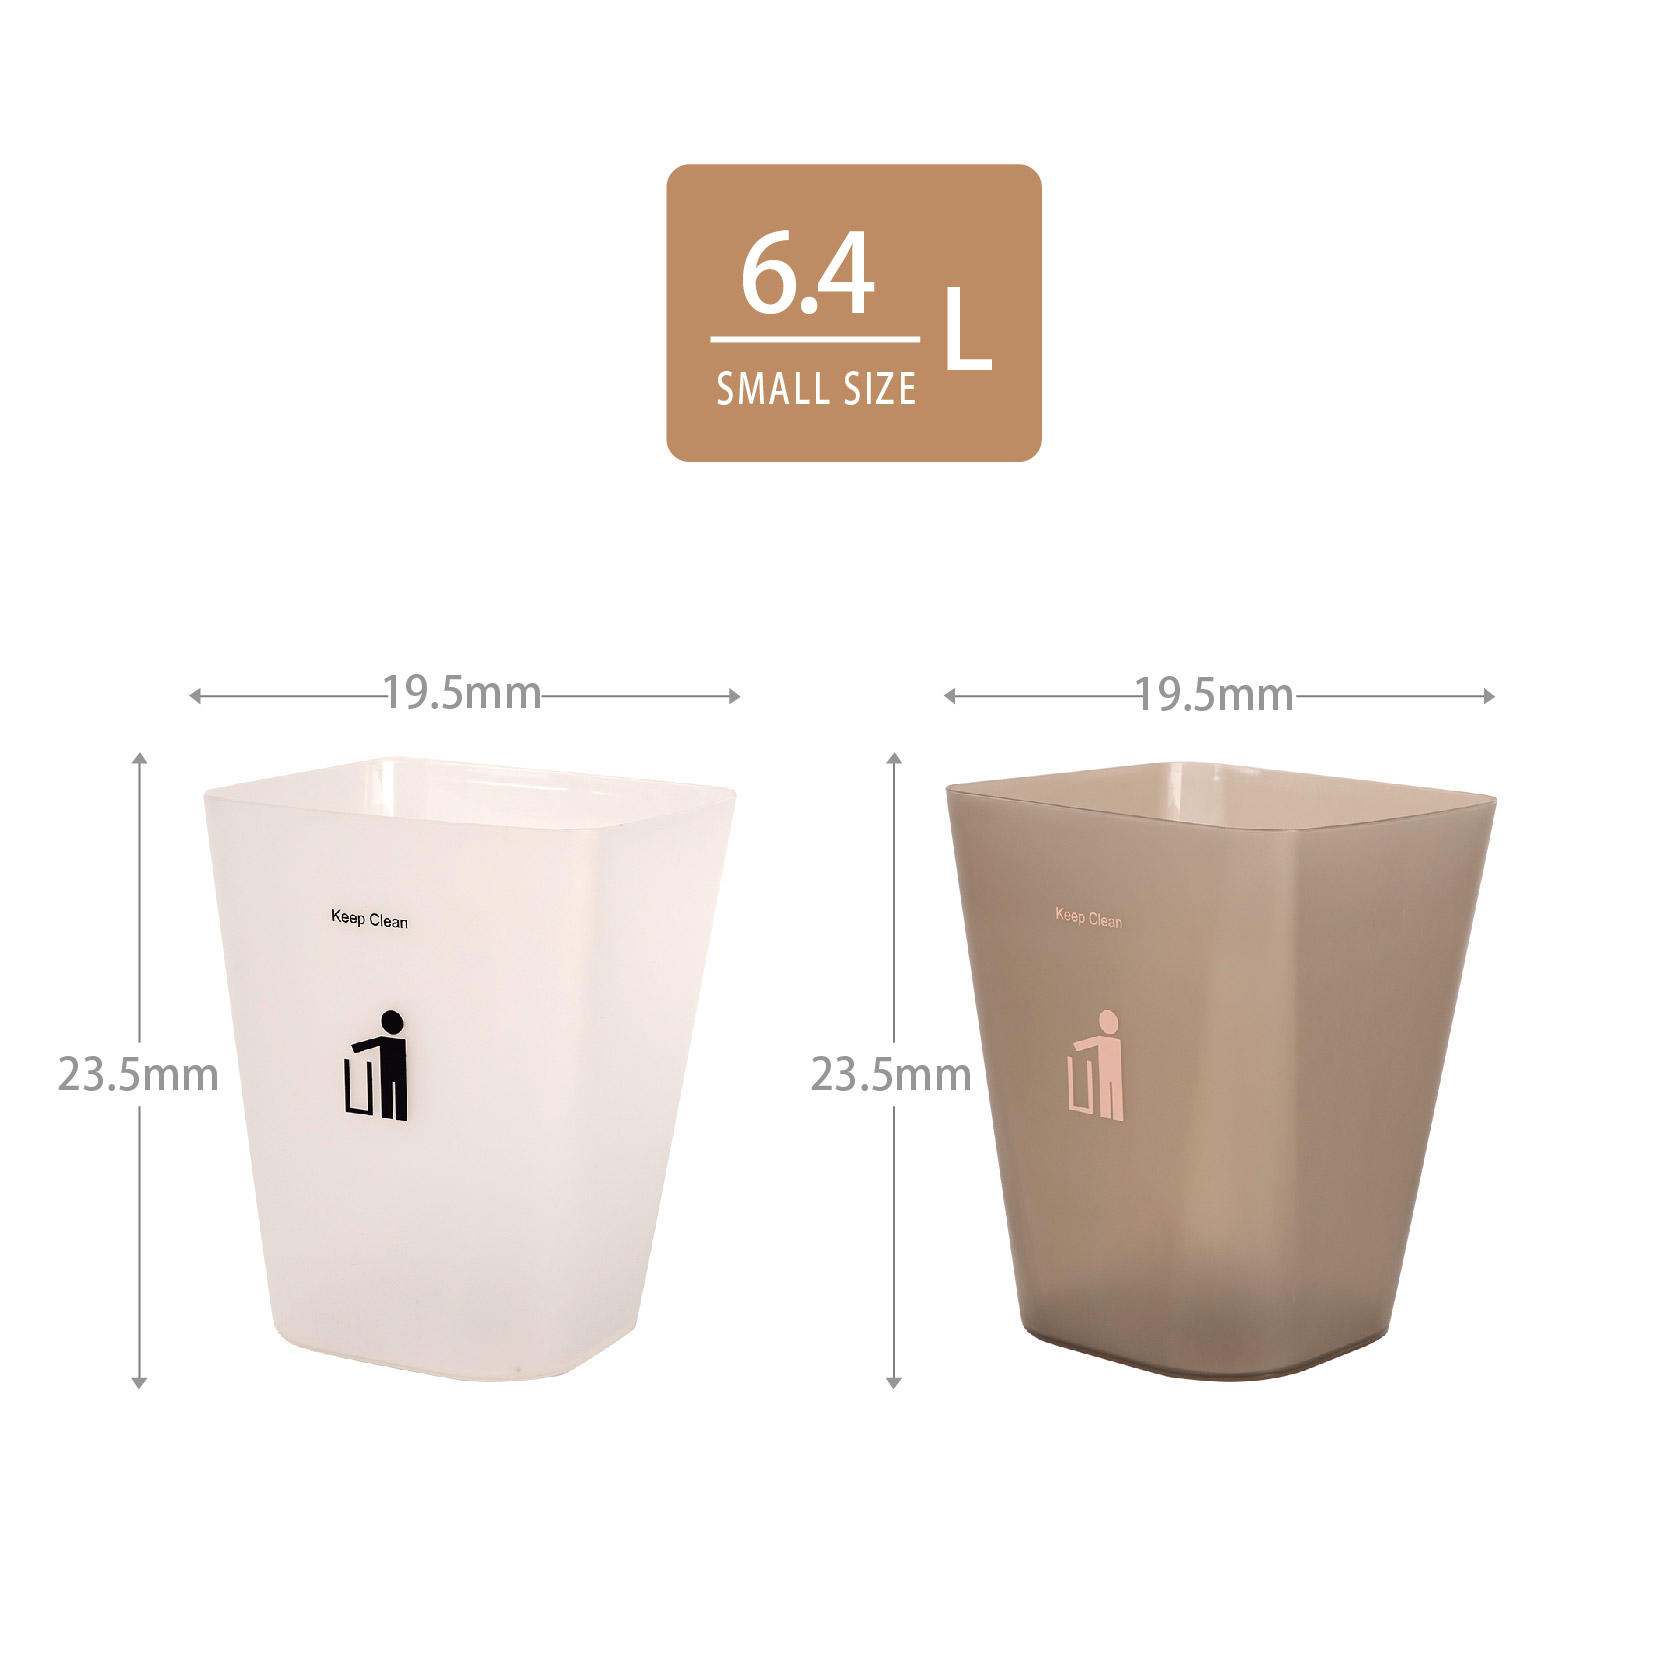 6.4L Office Trash Can